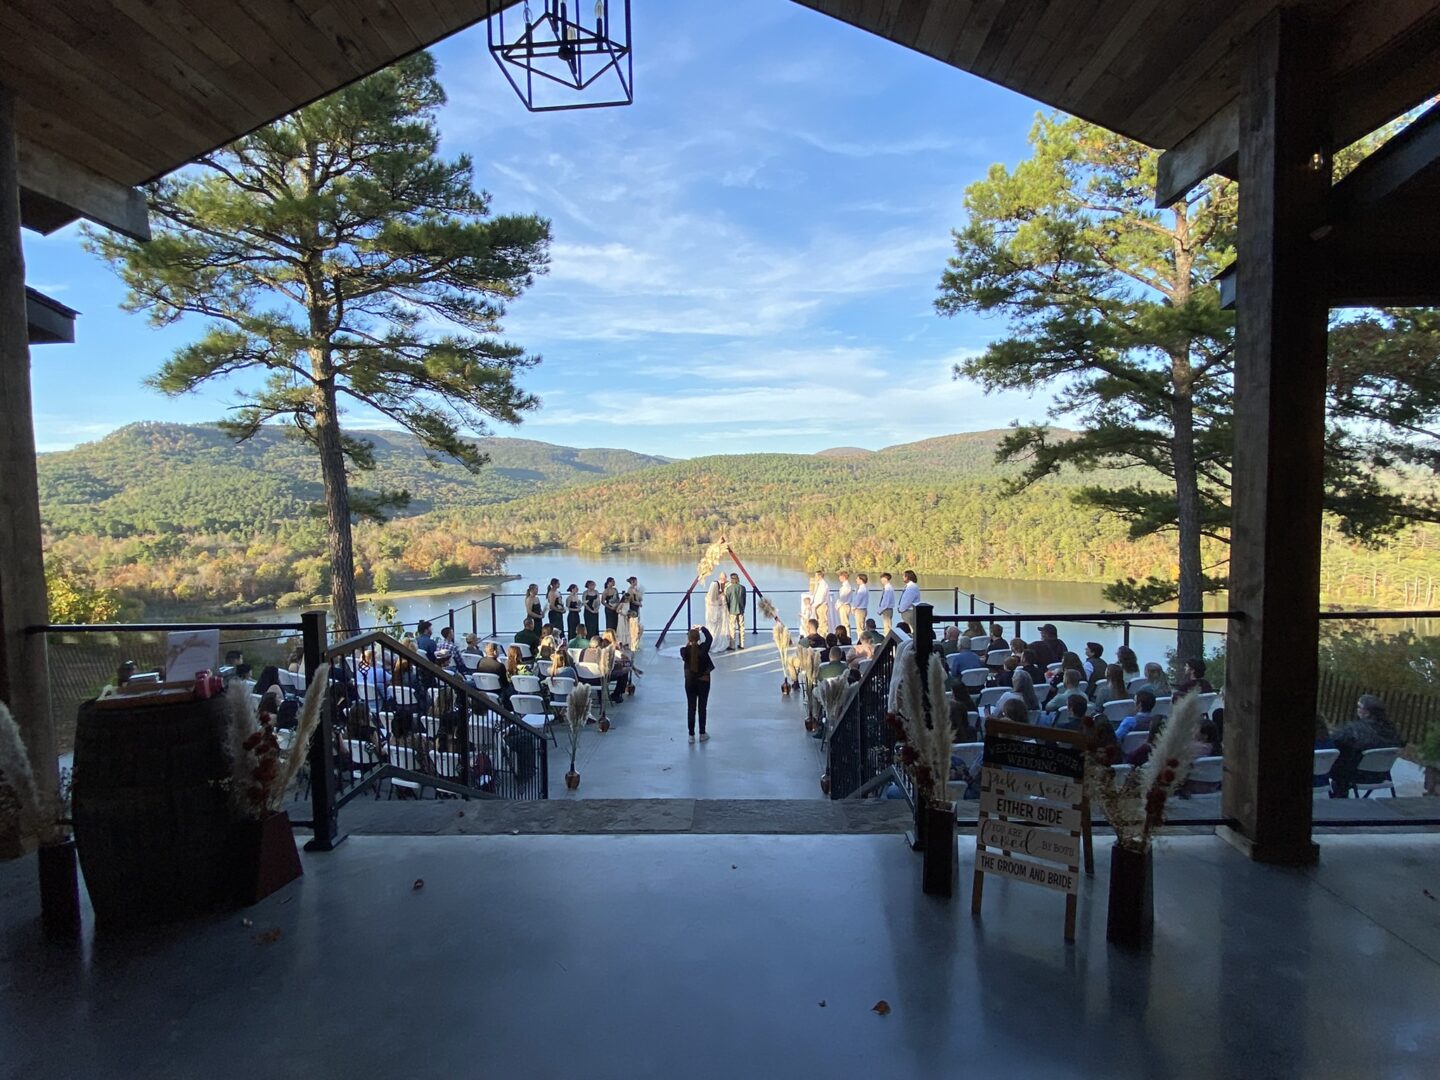 A wedding ceremony is being held on the deck.